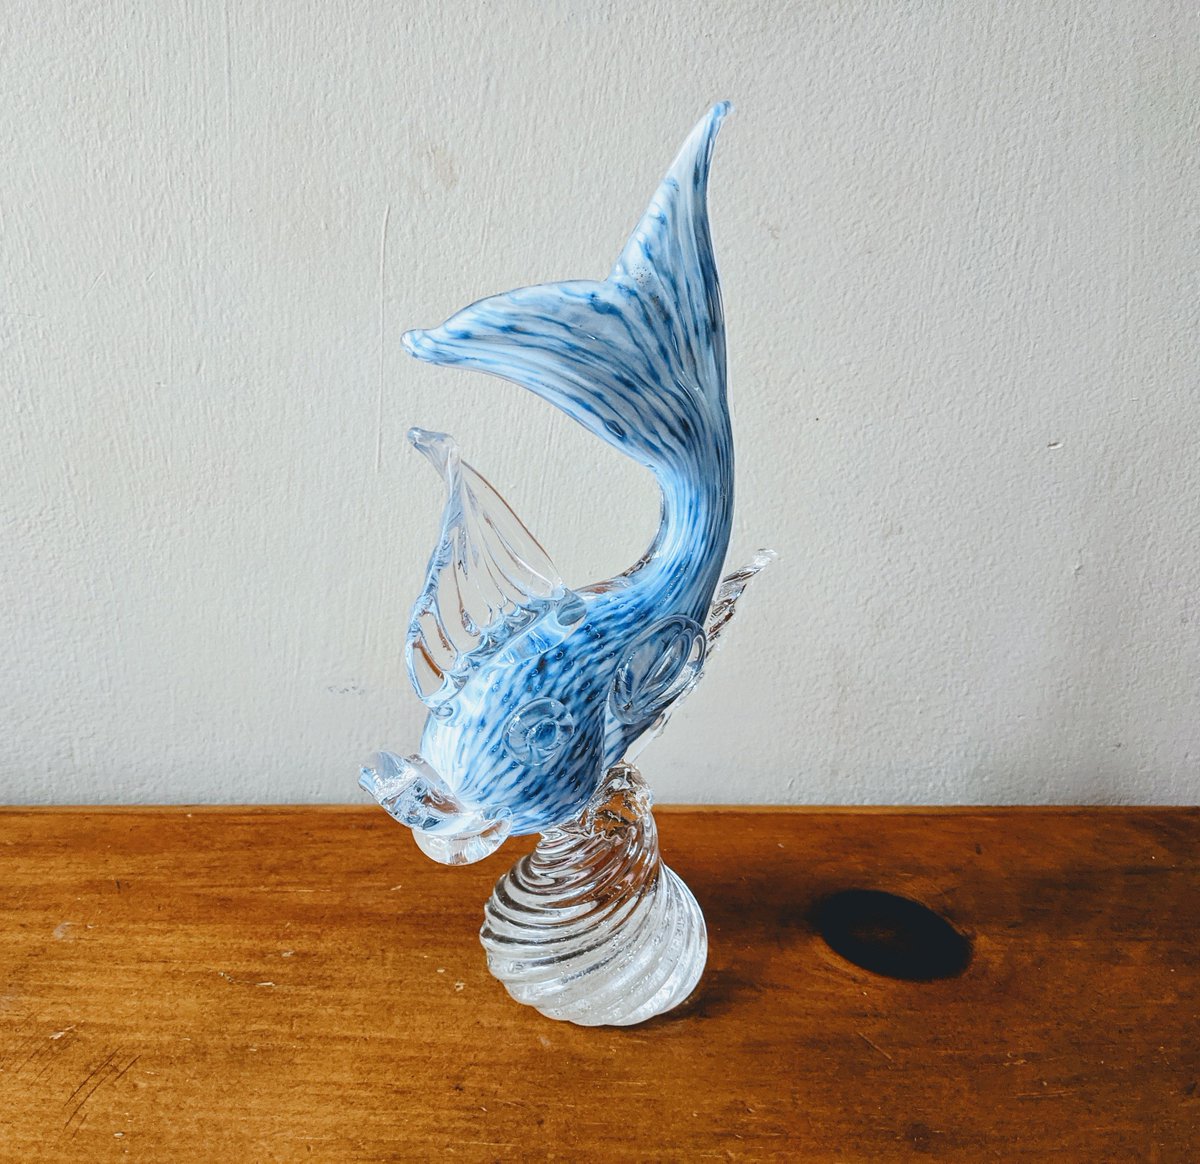 Vintage Hand Blown Blue and White Fish Sculpture just in at whimsicalvintage.etsy.com A great #giftidea for the fish lover!  Add it to your #coastaldecor or #beachdecor , either way it's guaranteed to bring a smile #etsy #etsyshop #whimsicalvintage